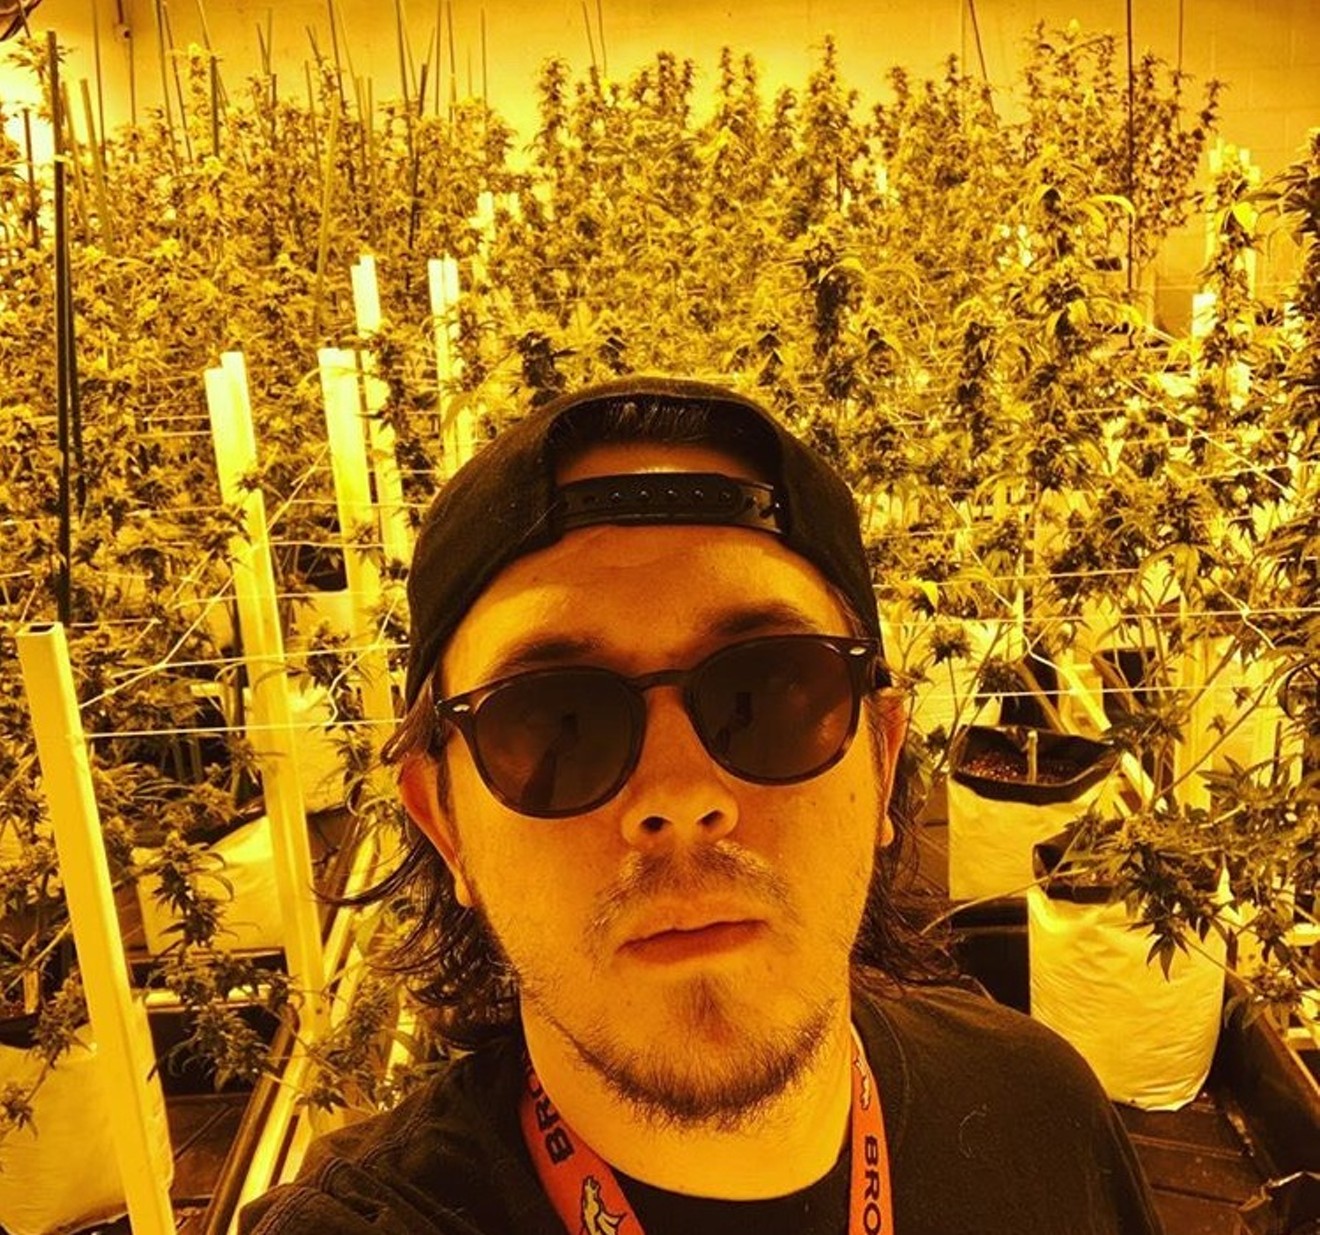 Kennn Wall transferred his skills from the culinary world to cannabis extraction.